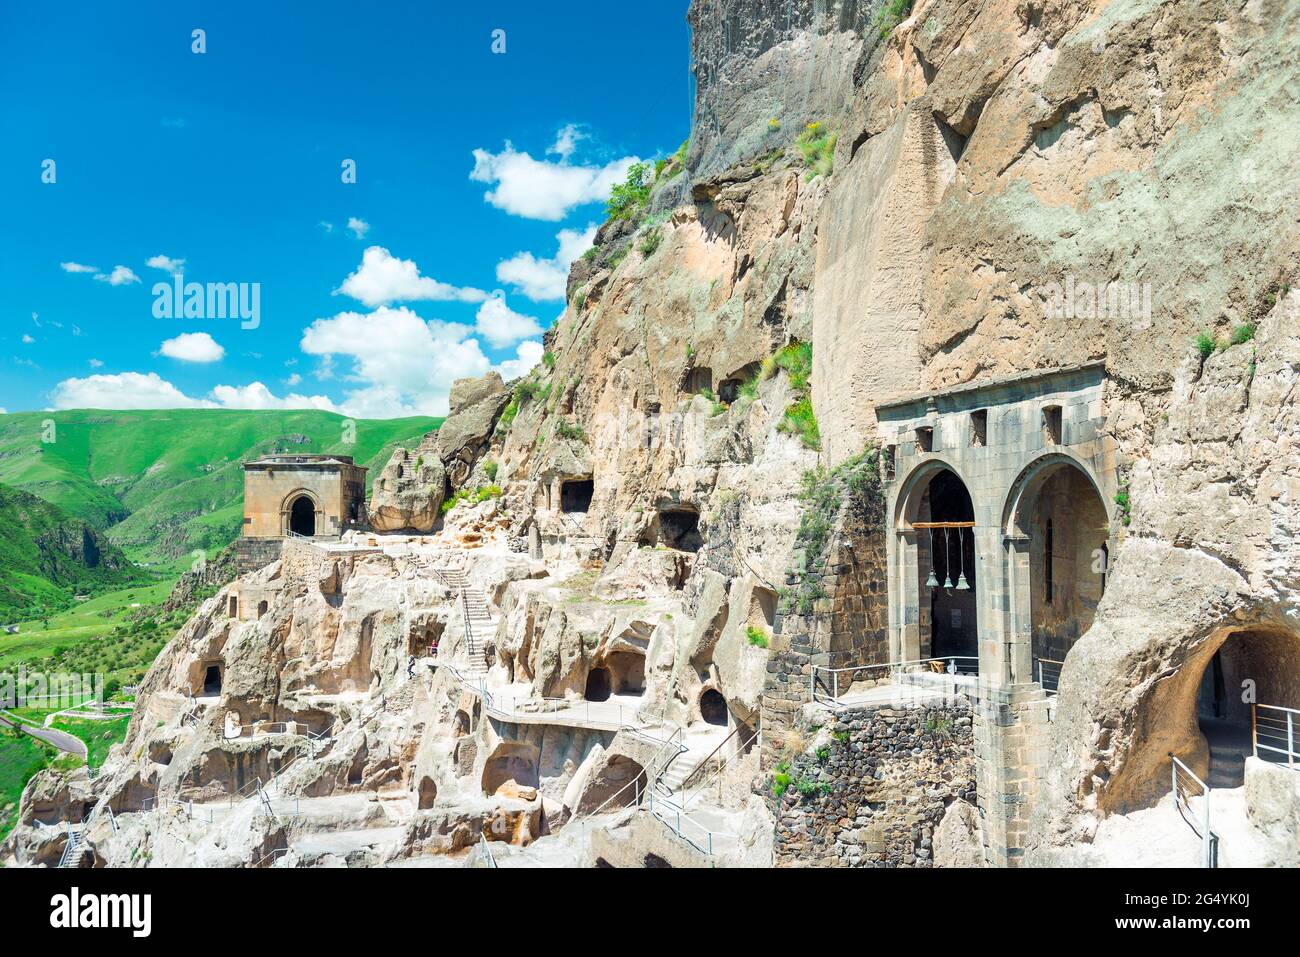 View of the ancient cave city of Vardzia, carved into the rock - a famous attraction of Georgia Stock Photo